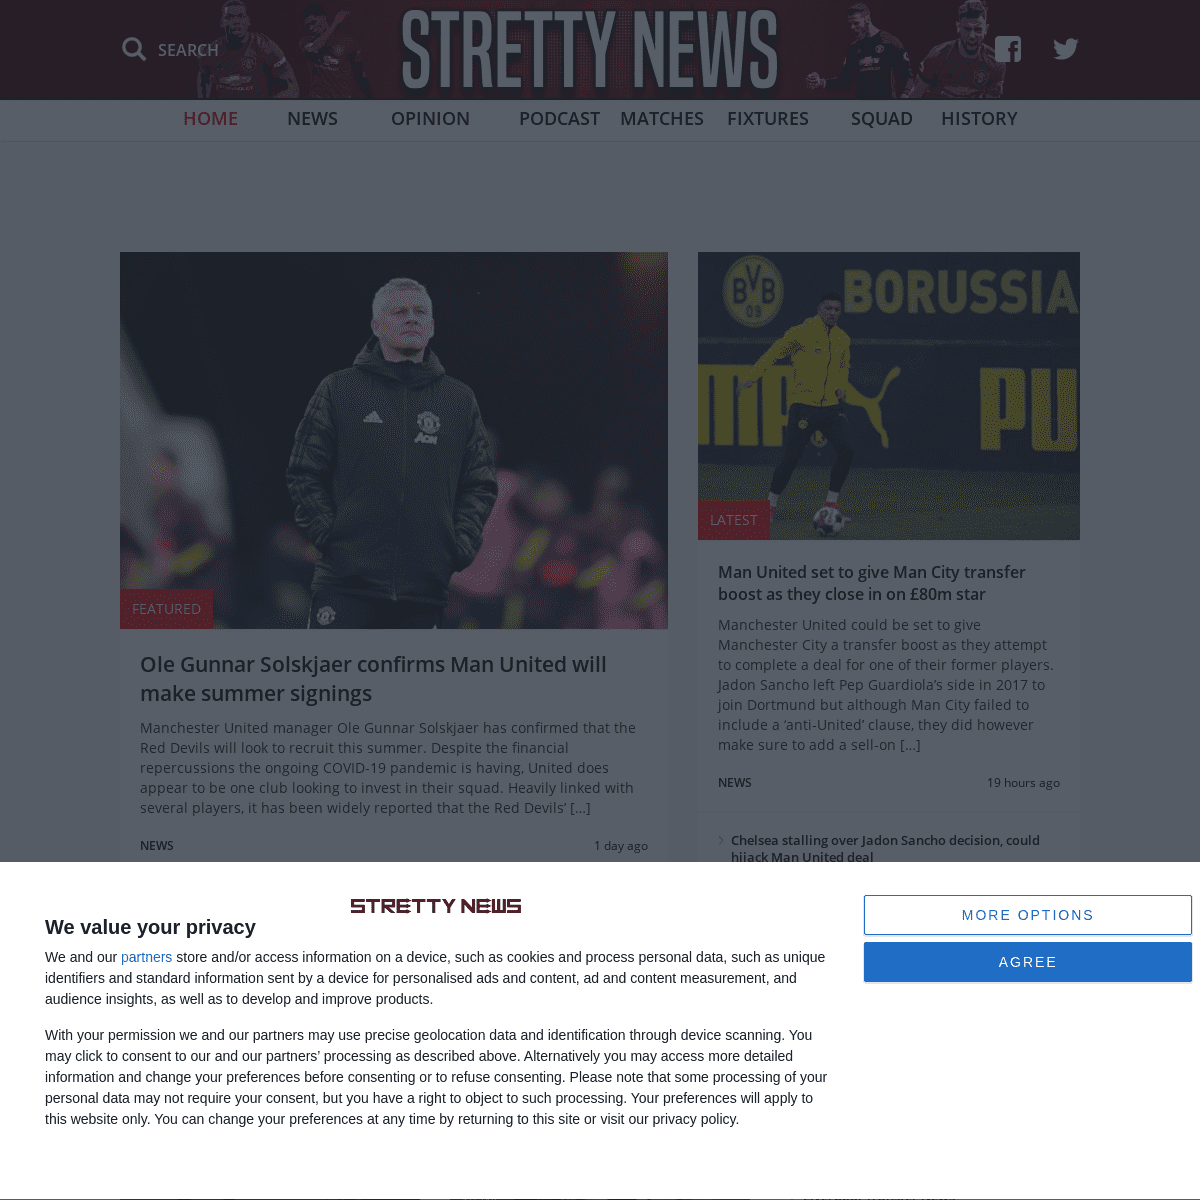 A complete backup of https://strettynews.com